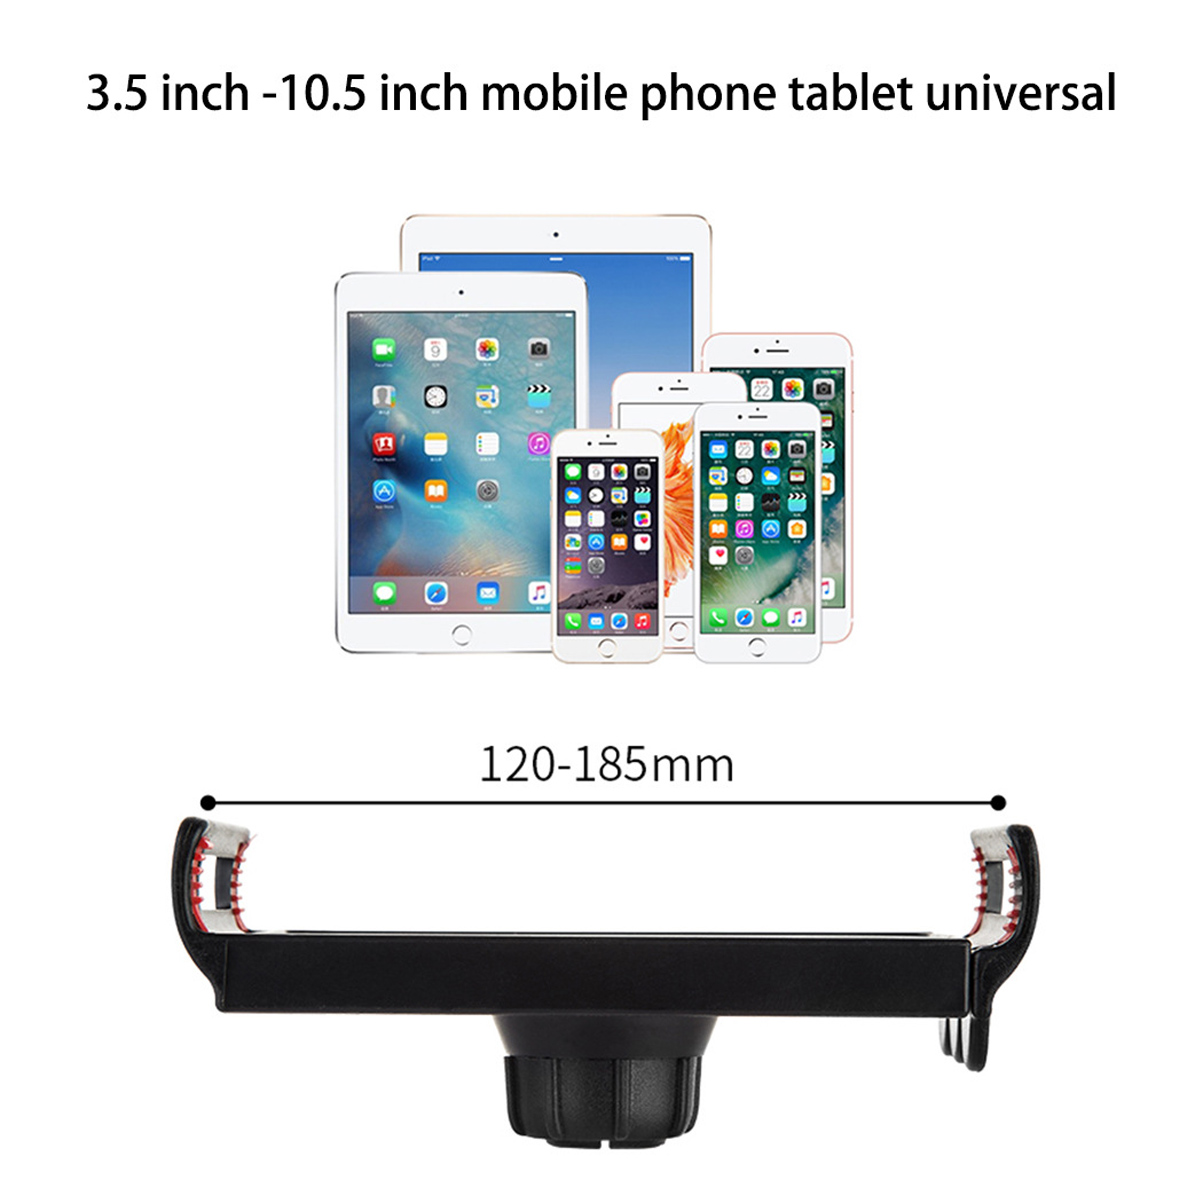 Universal-Height-Adjustable-Mobile-Phone-Floor-Stand-Holder-for-Mobile-Phone-or-Tablet-between-35-10-1747812-7